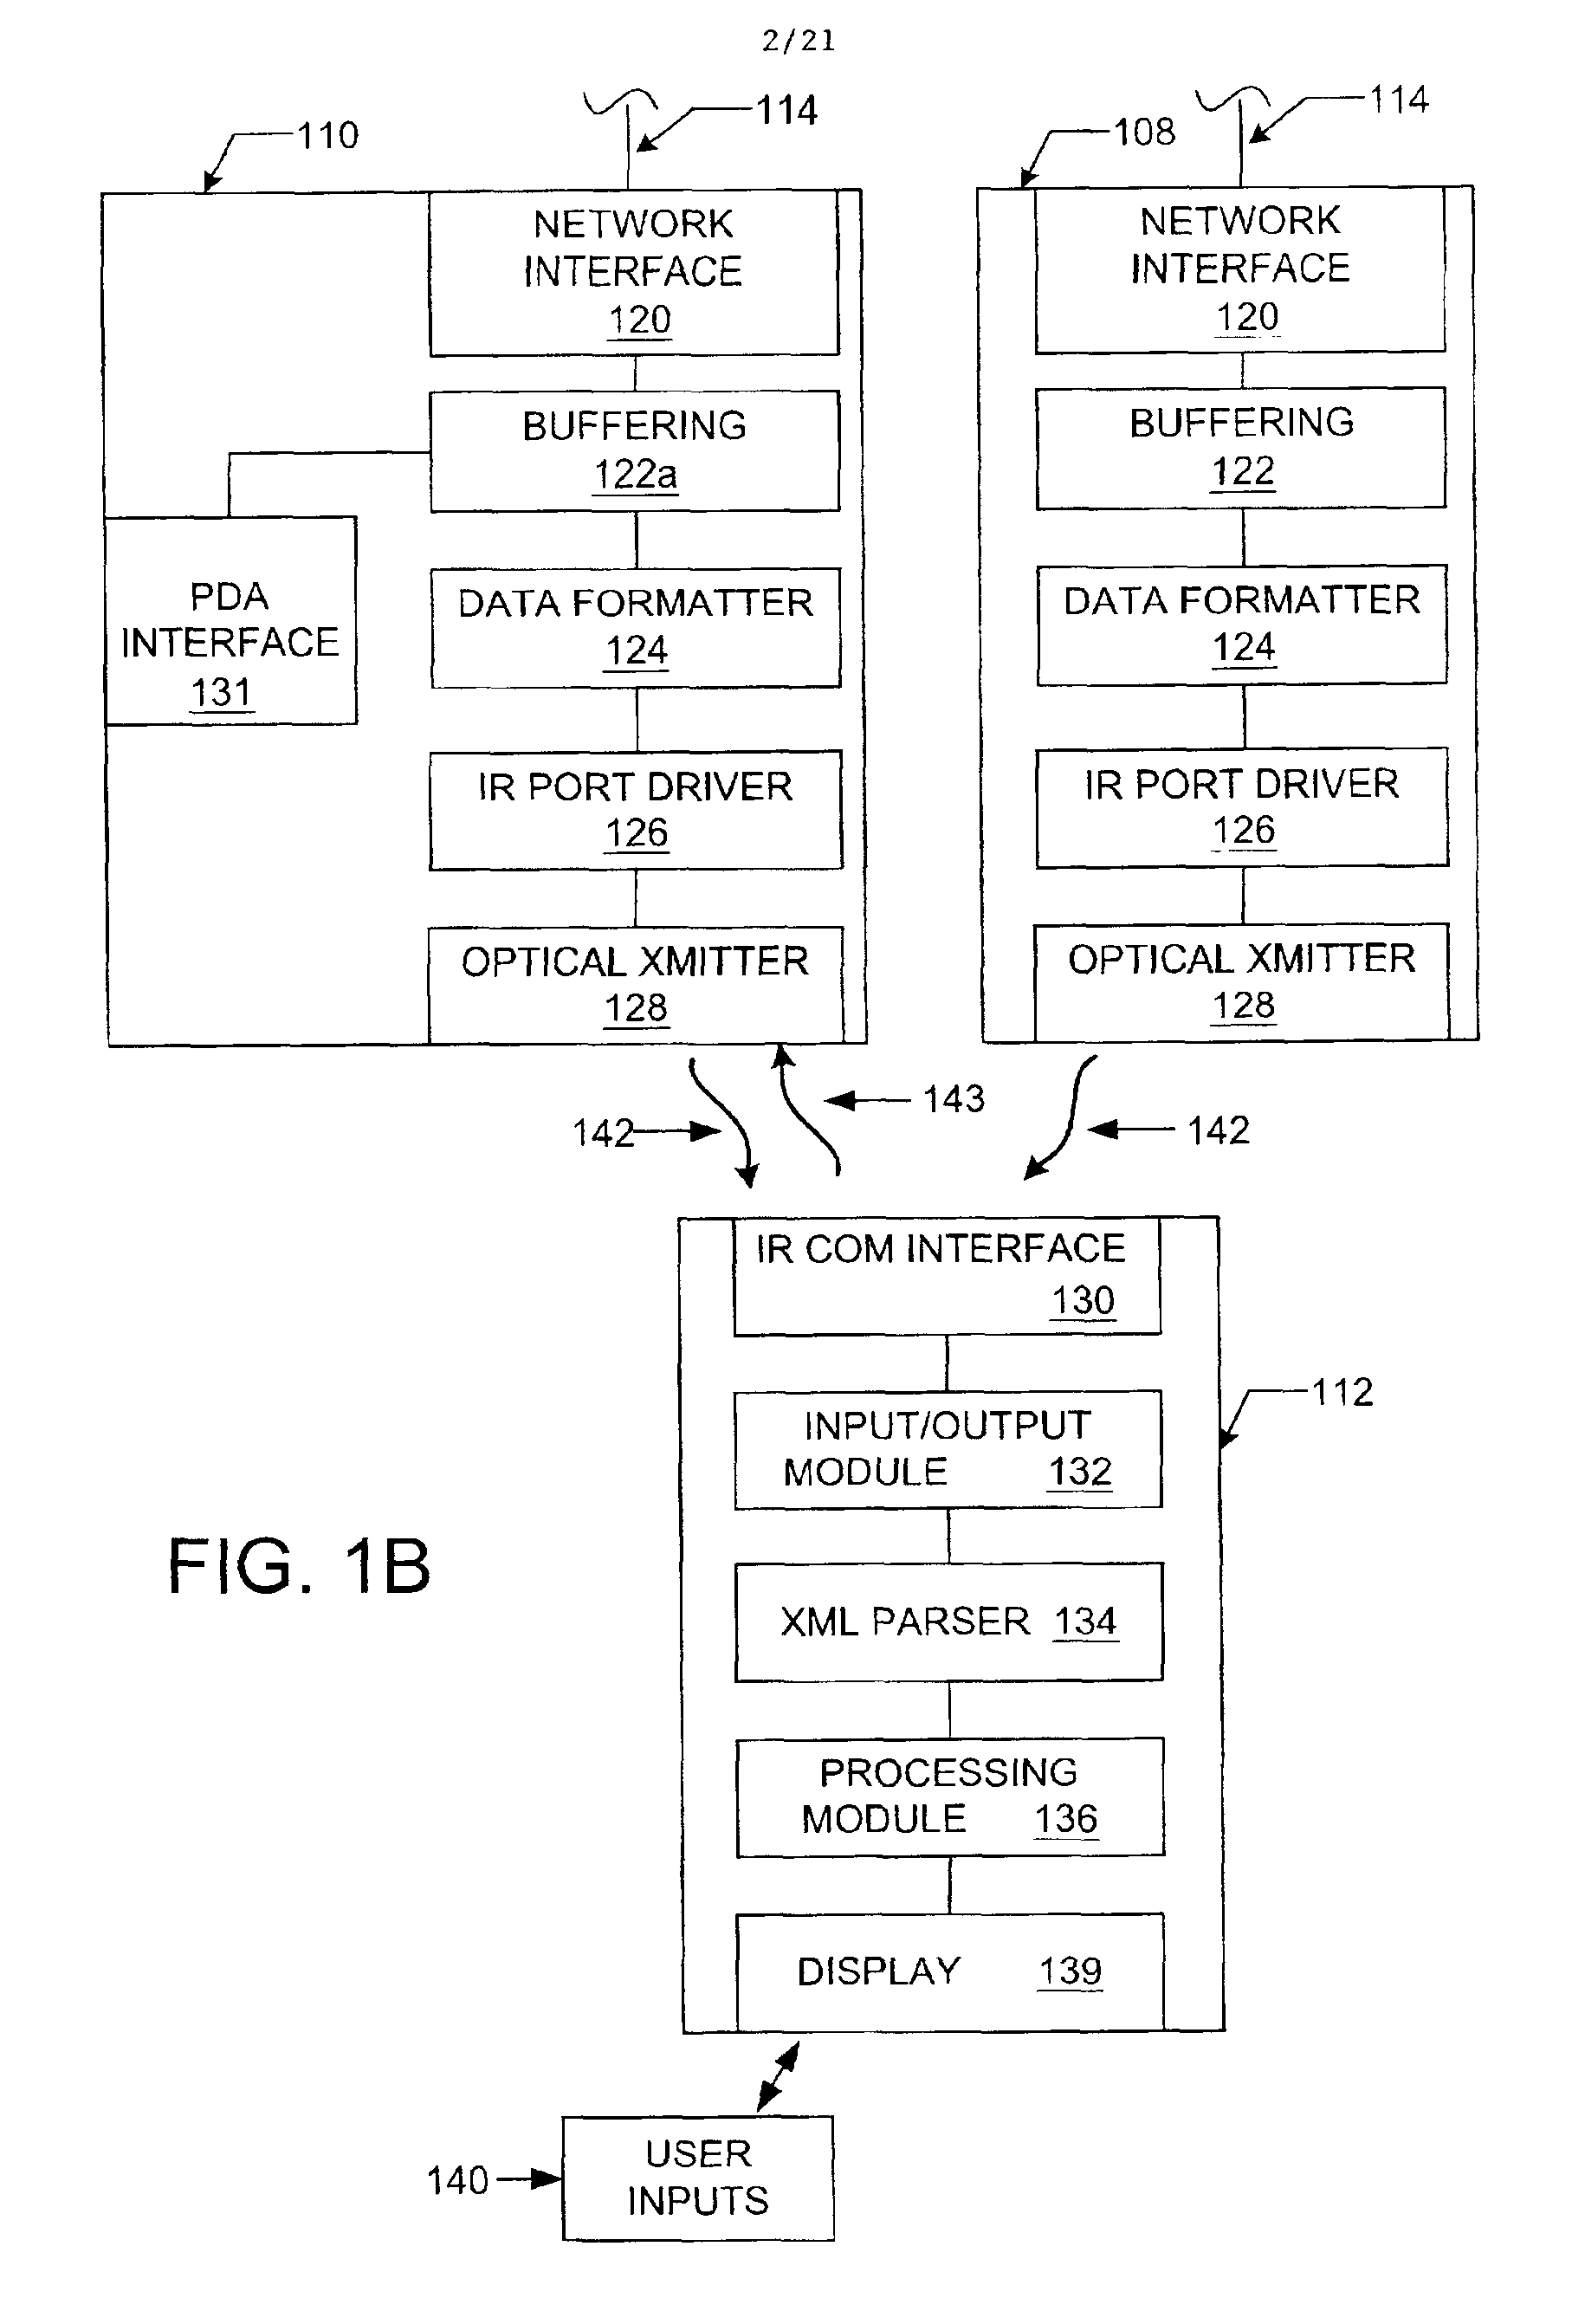 Method and apparatus for reliable unidirectional communication in a data network